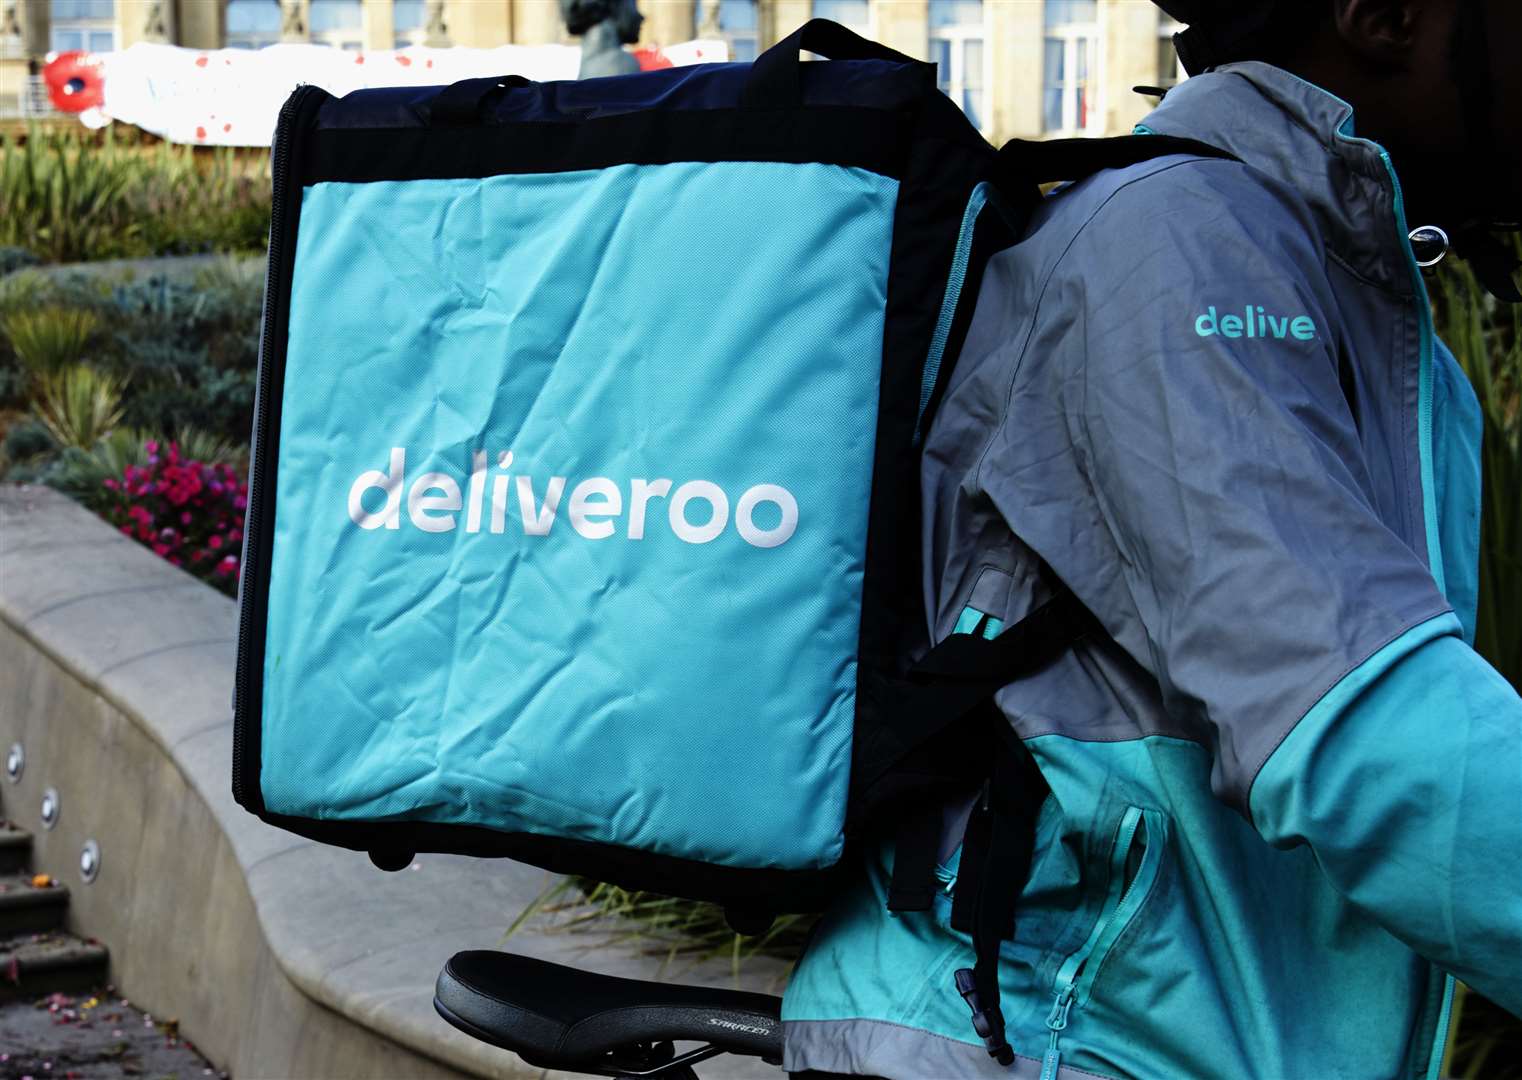 A Deliveroo driver was attacked. Stock image.